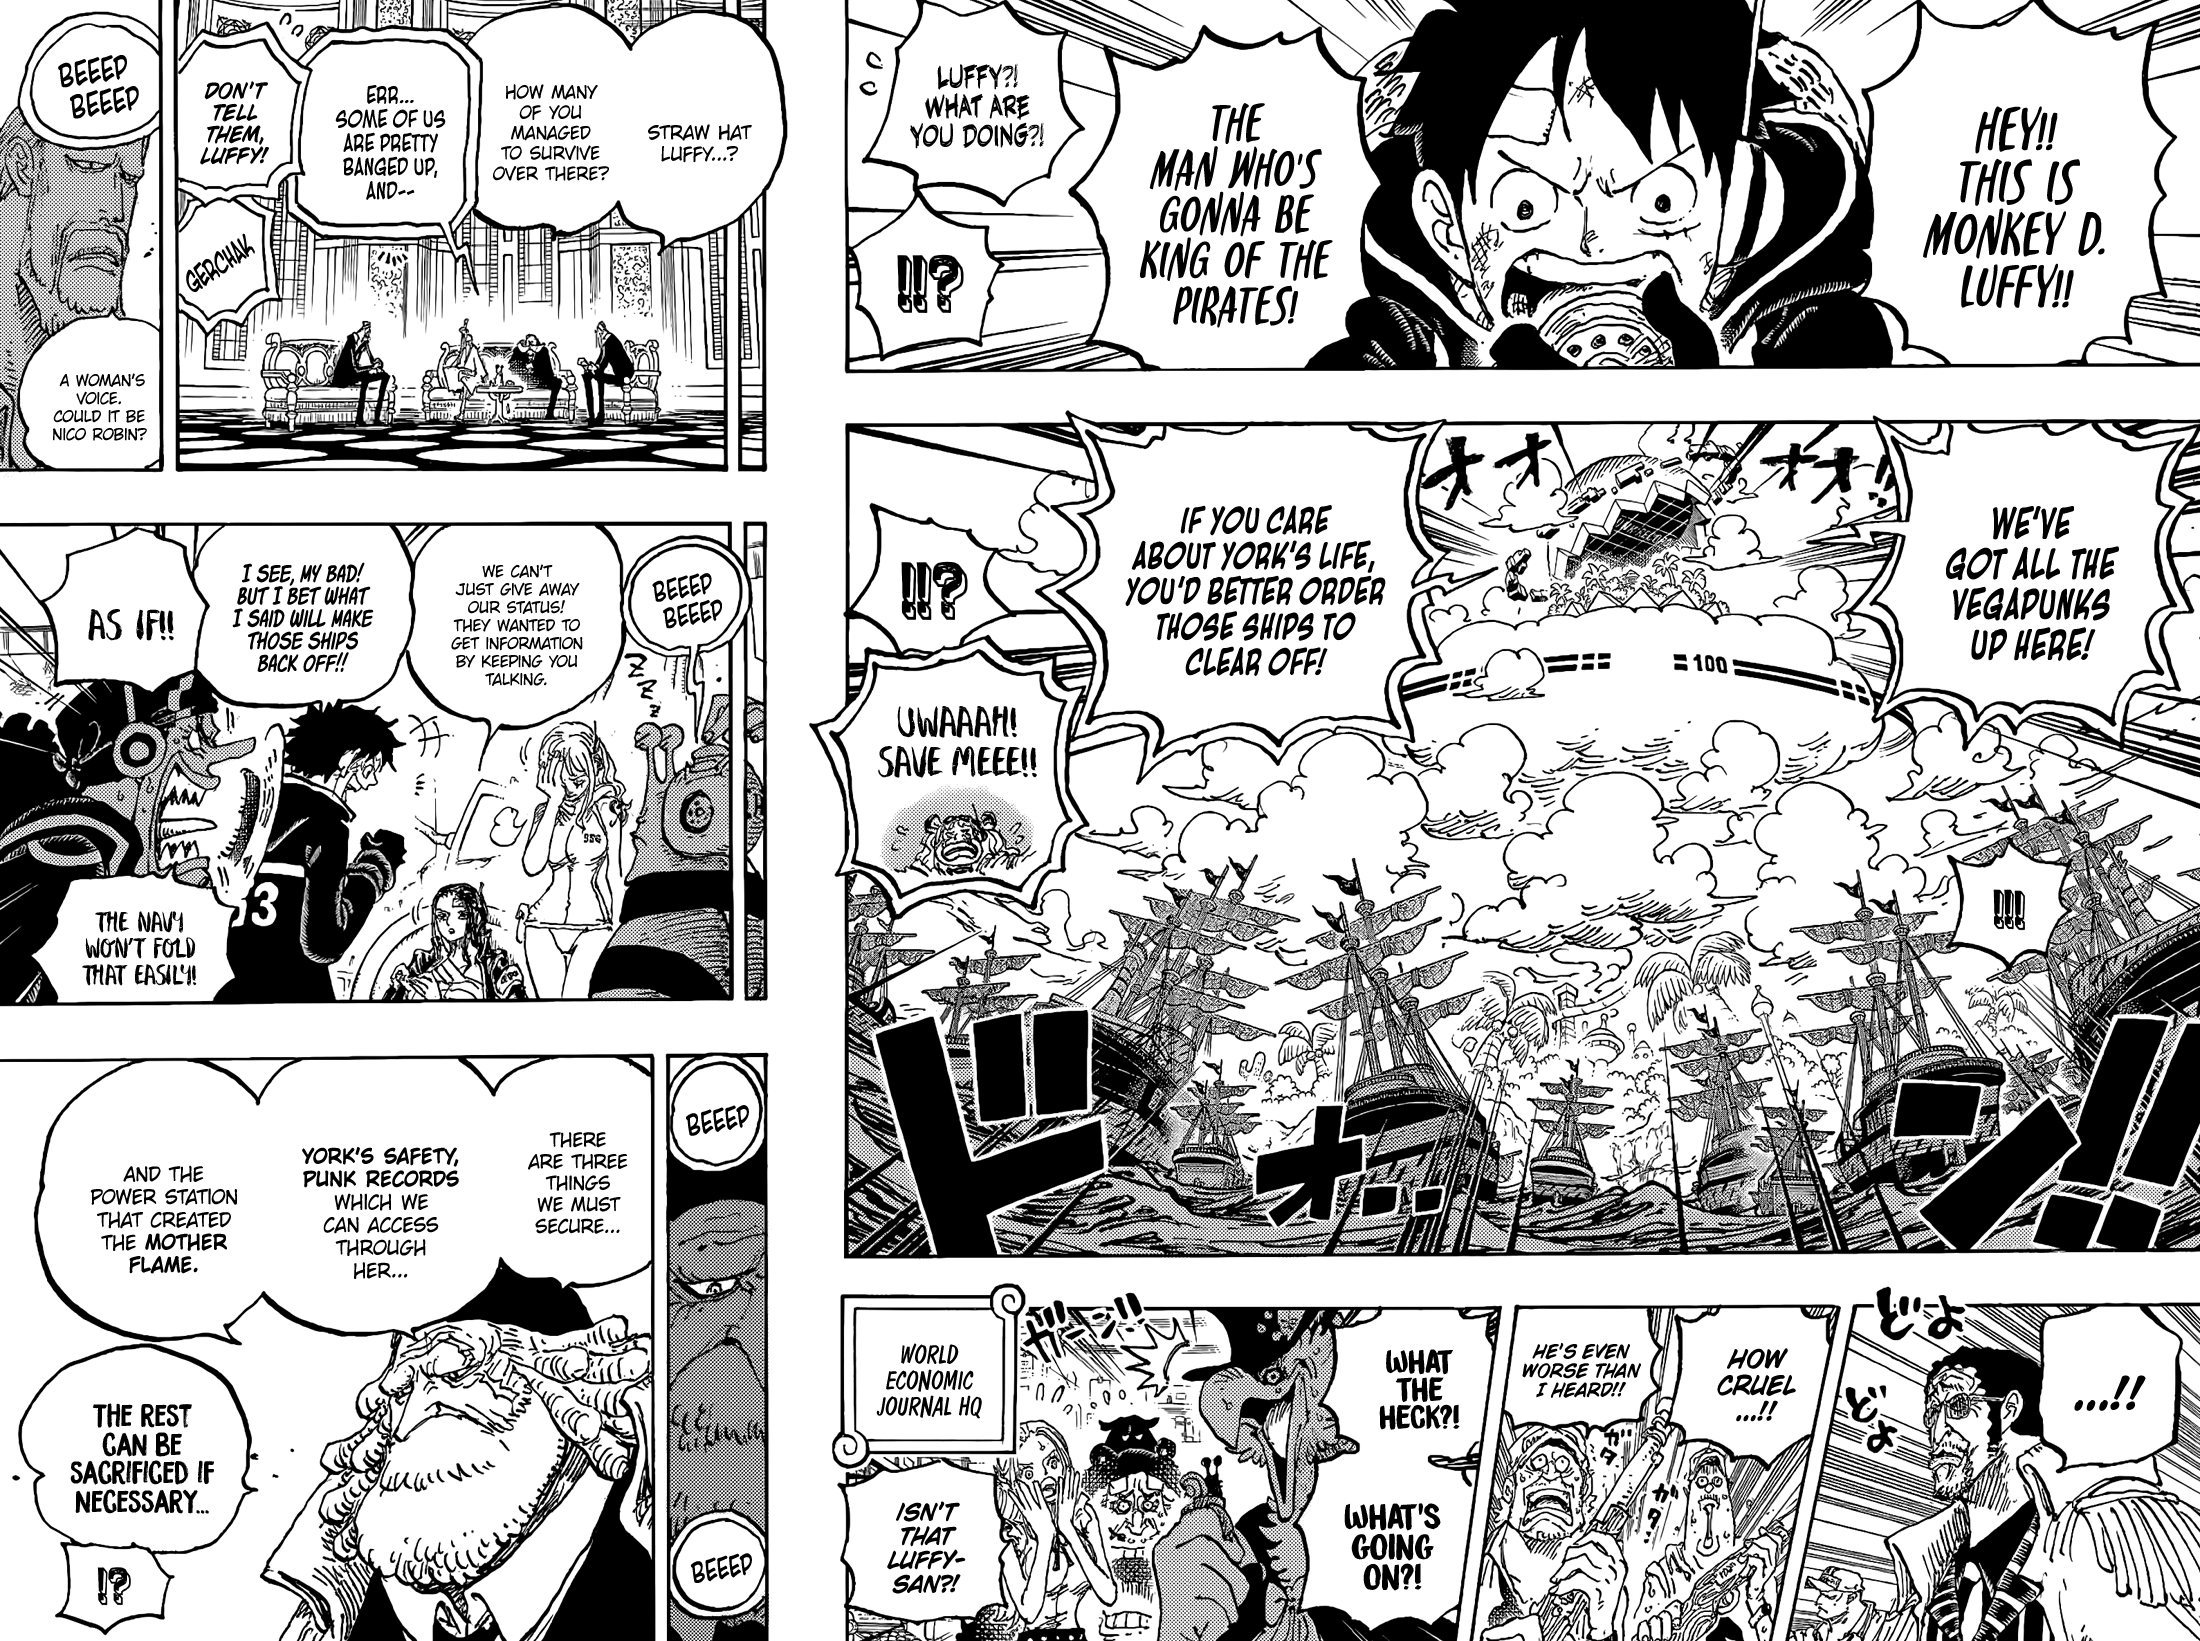 Spoiler - One Piece Chapter 1022 Spoilers Discussion